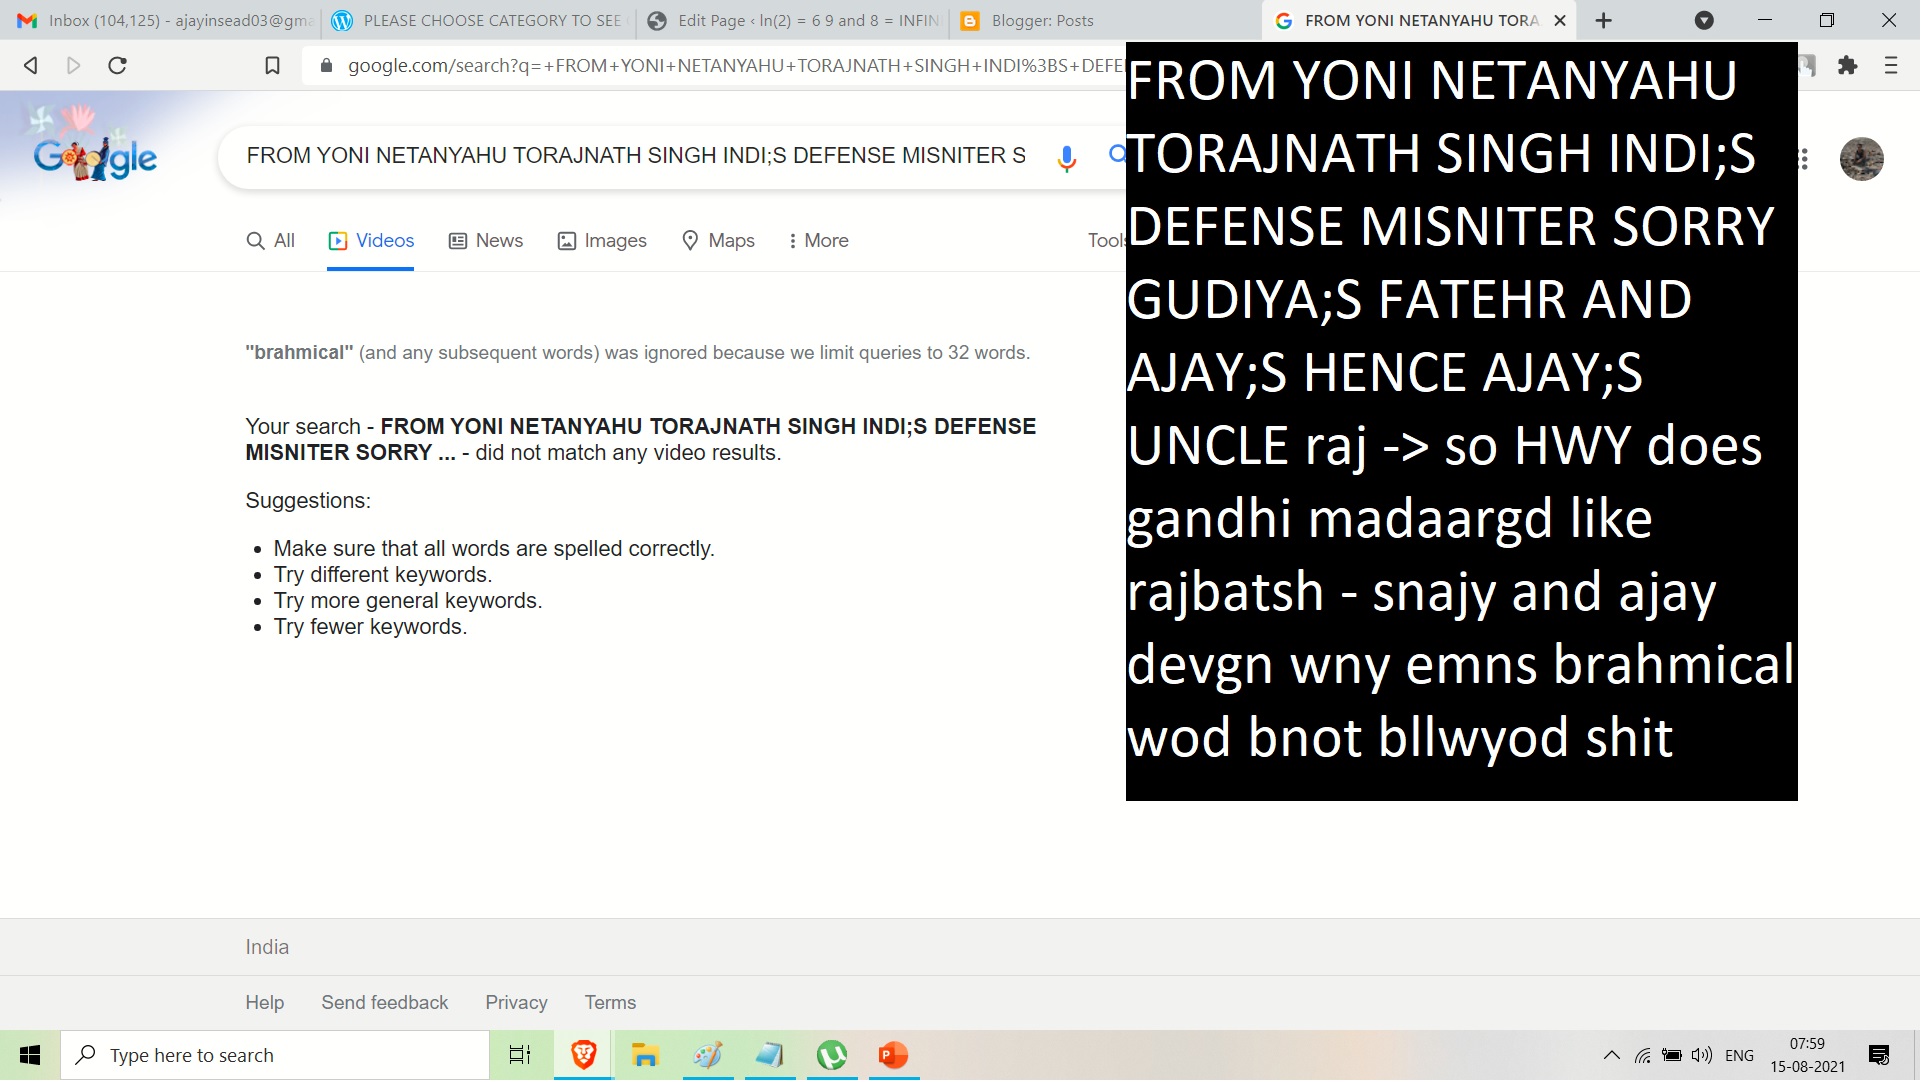 from yoni netanyahu to india and ajay;s uncle rajnath isngh - oplease jst leae narendar pelase